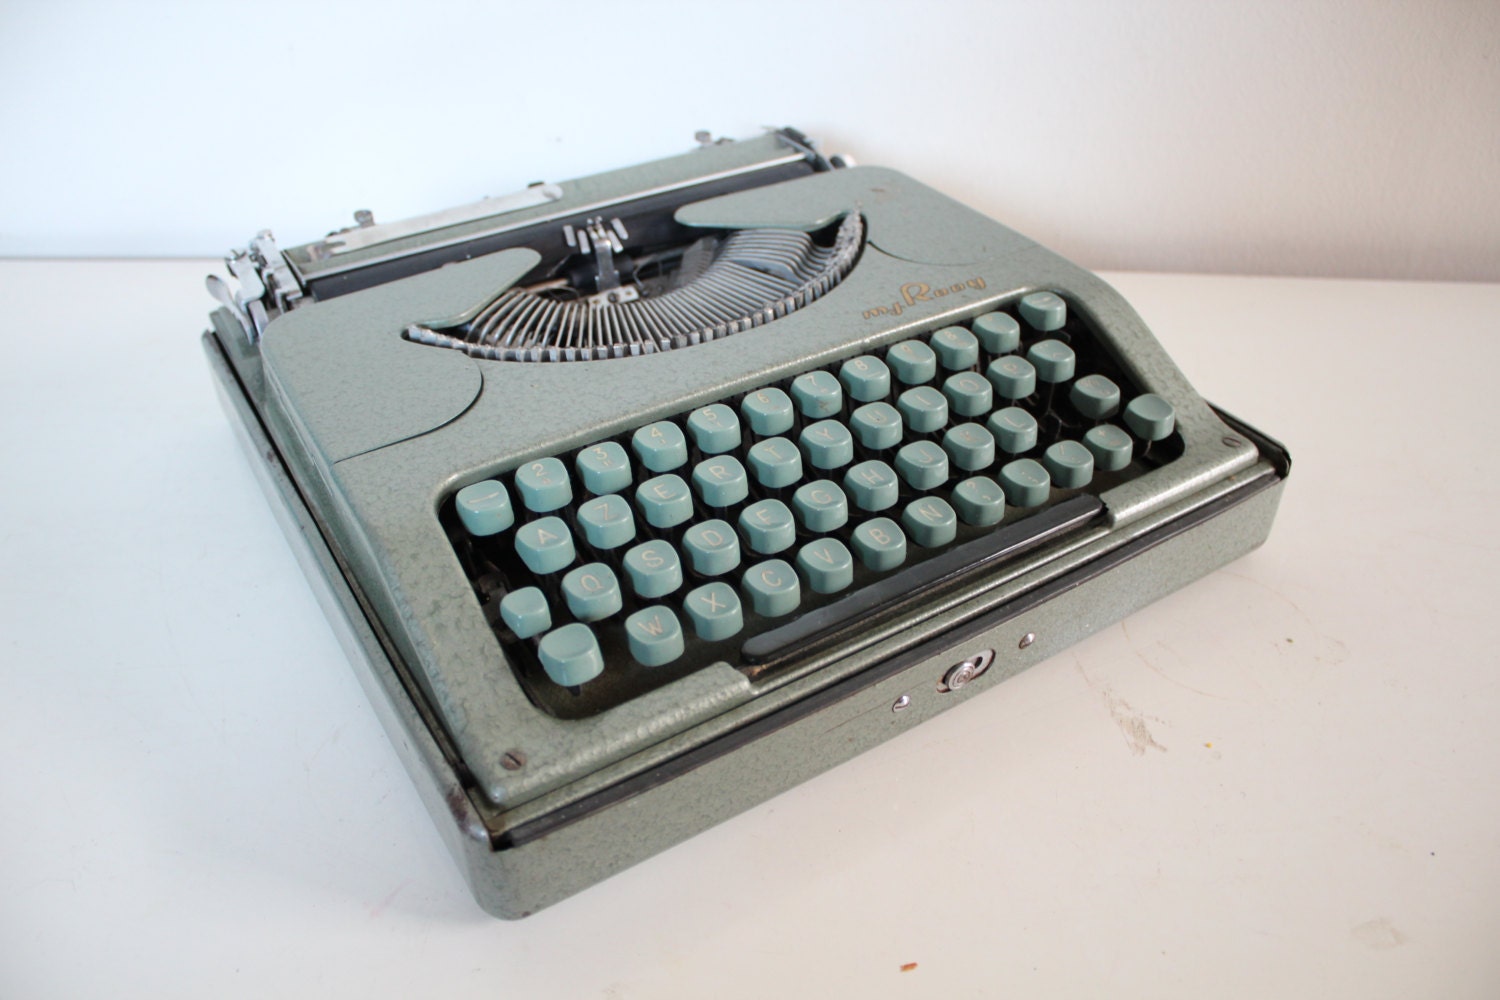 Very rare 1950's Rooy portable typewriter - the flattest in the world. 4cm thick, case included. - VintageEuroDesign